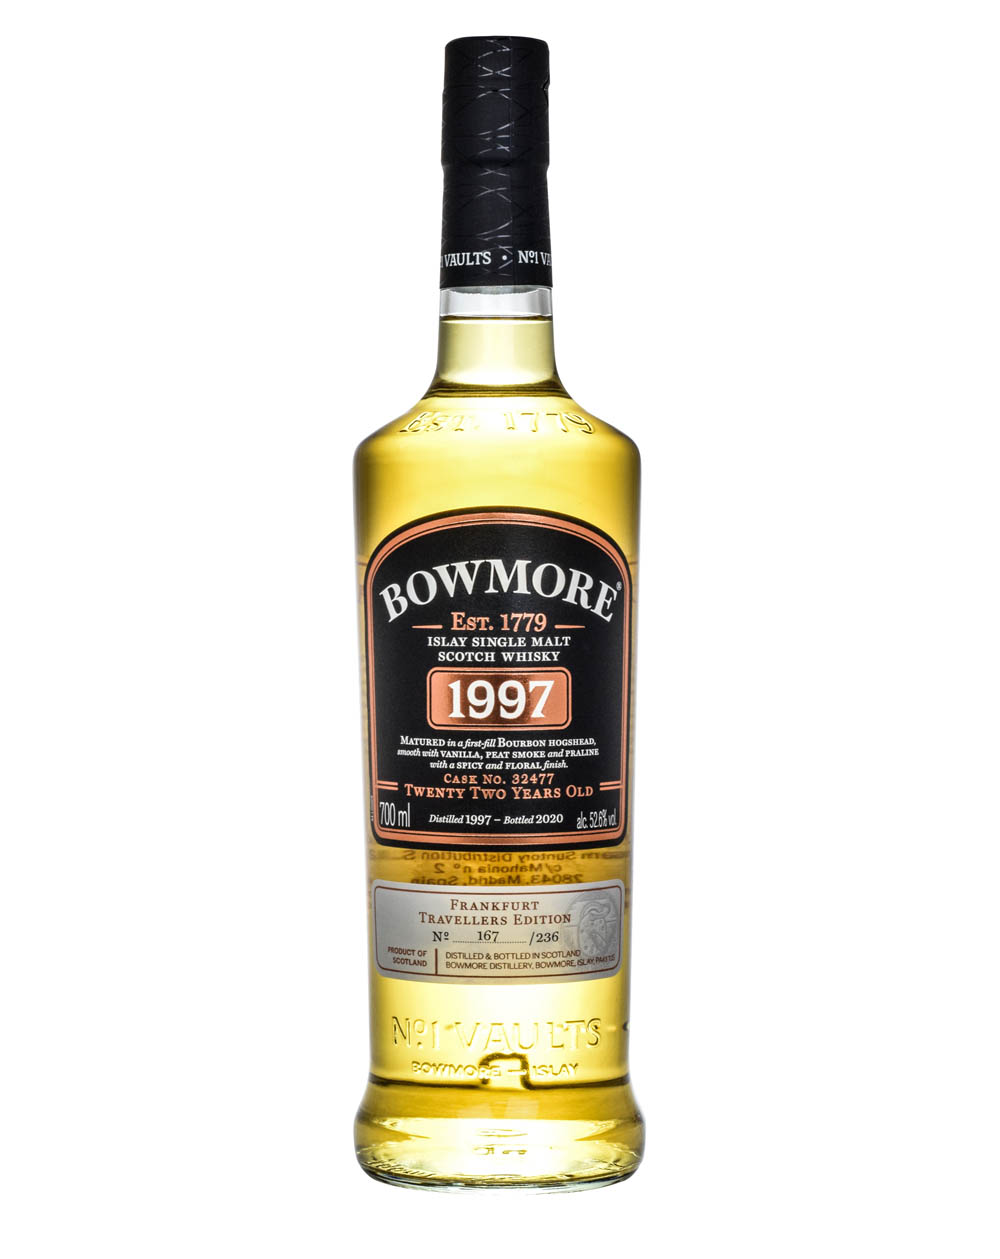 Bowmore 22 Years Old Frankfurt Travaler's Edition 1997 Musthave Malts MHM